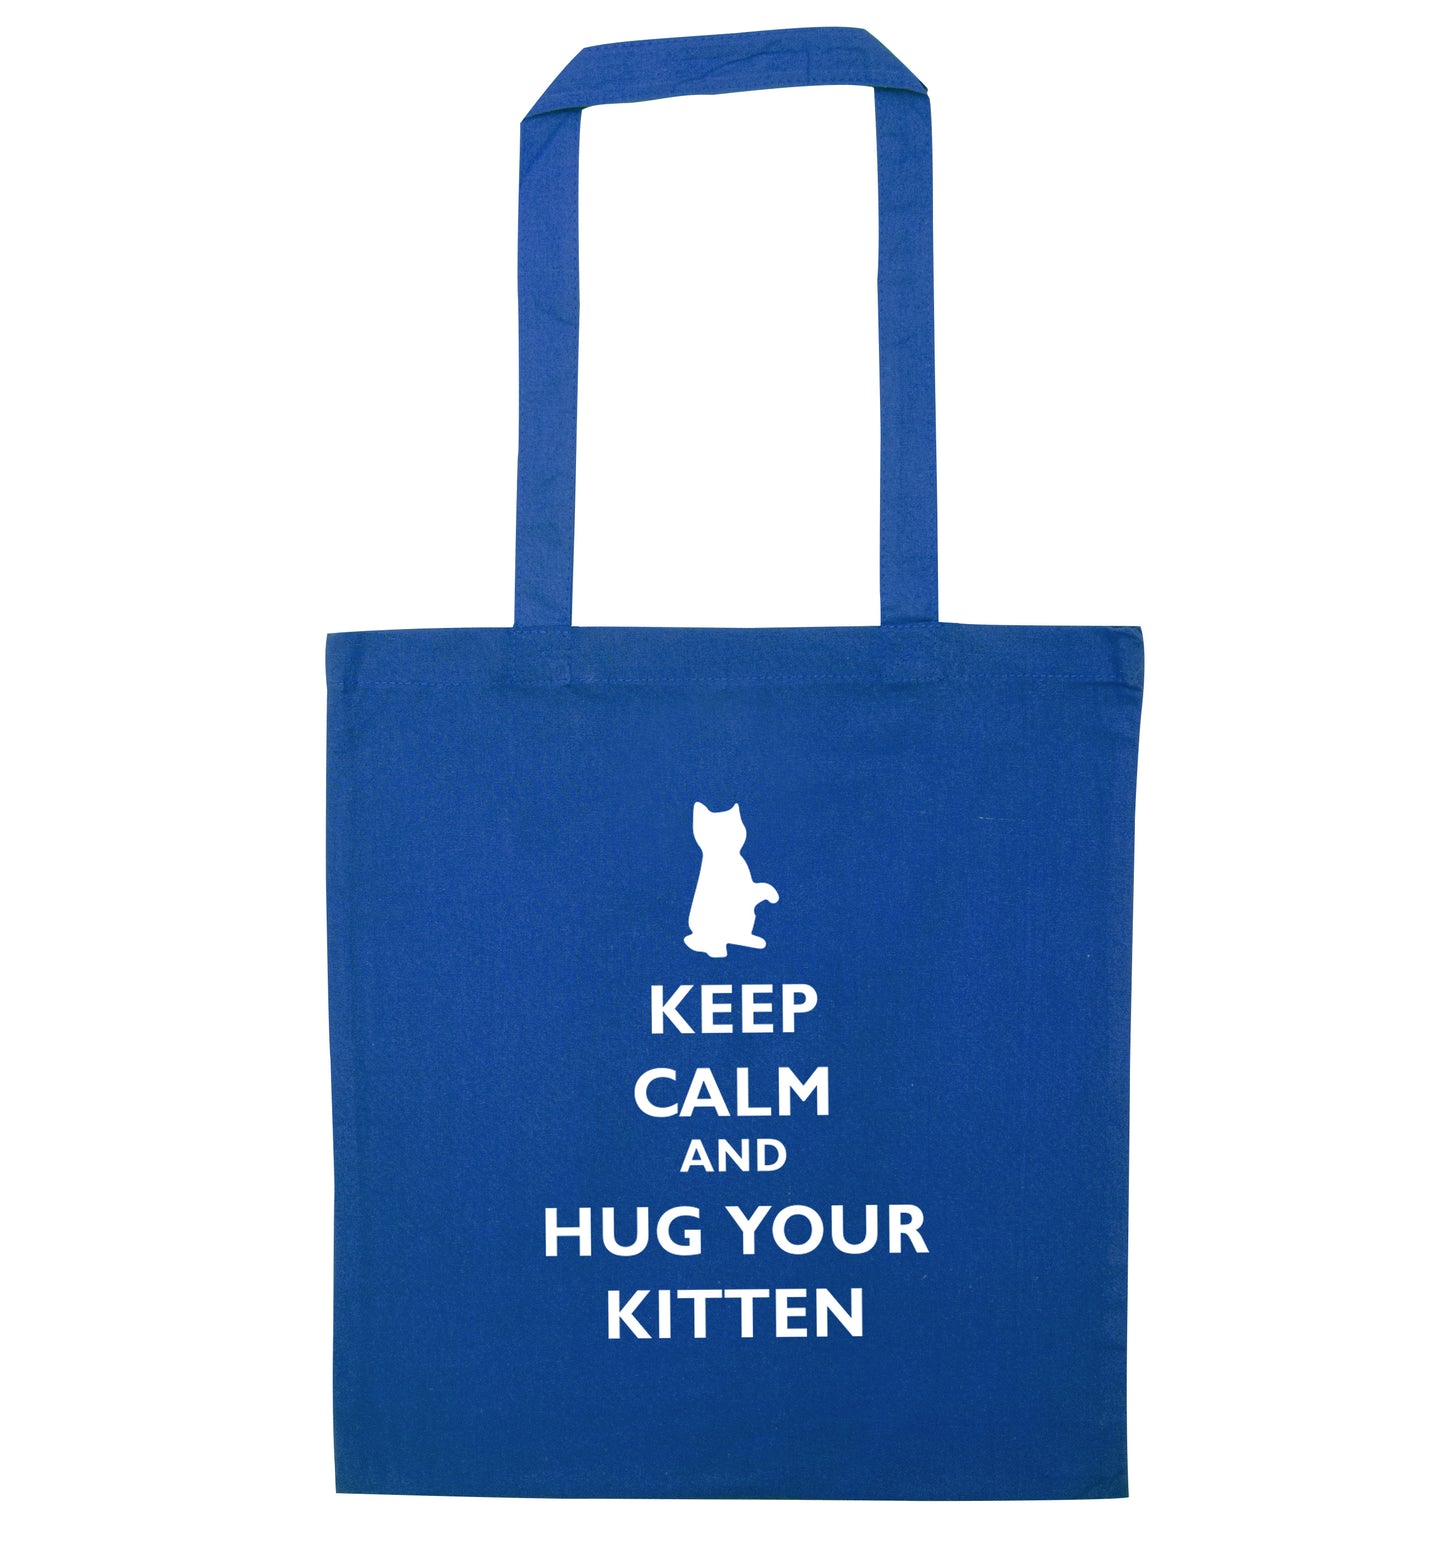 Keep calm and hug your kitten blue tote bag